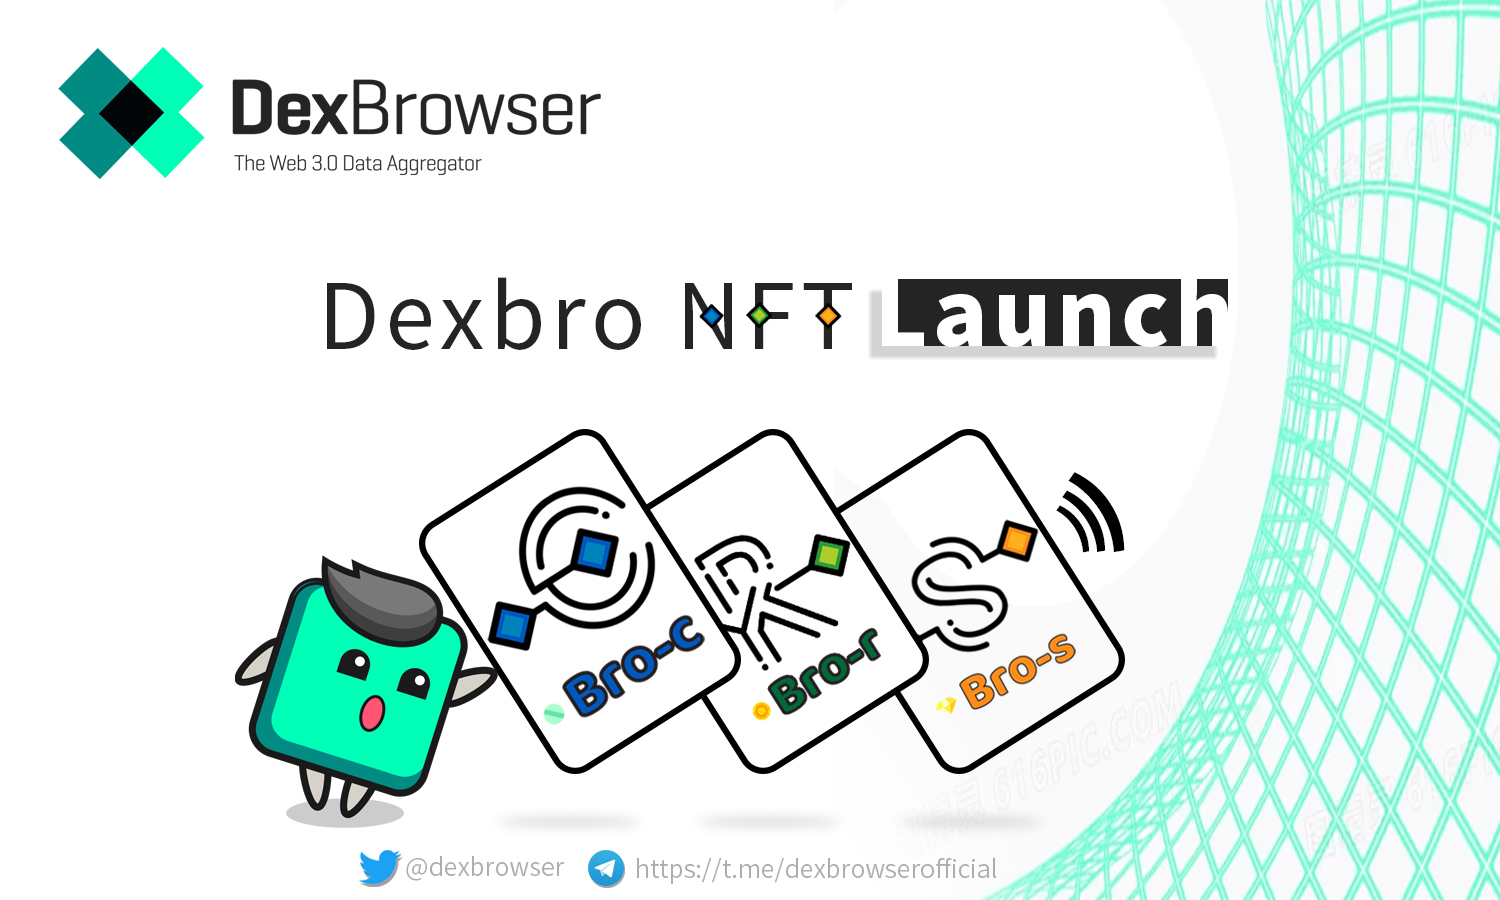 DexBrowser, Tuesday, July 26, 2022, Press release picture